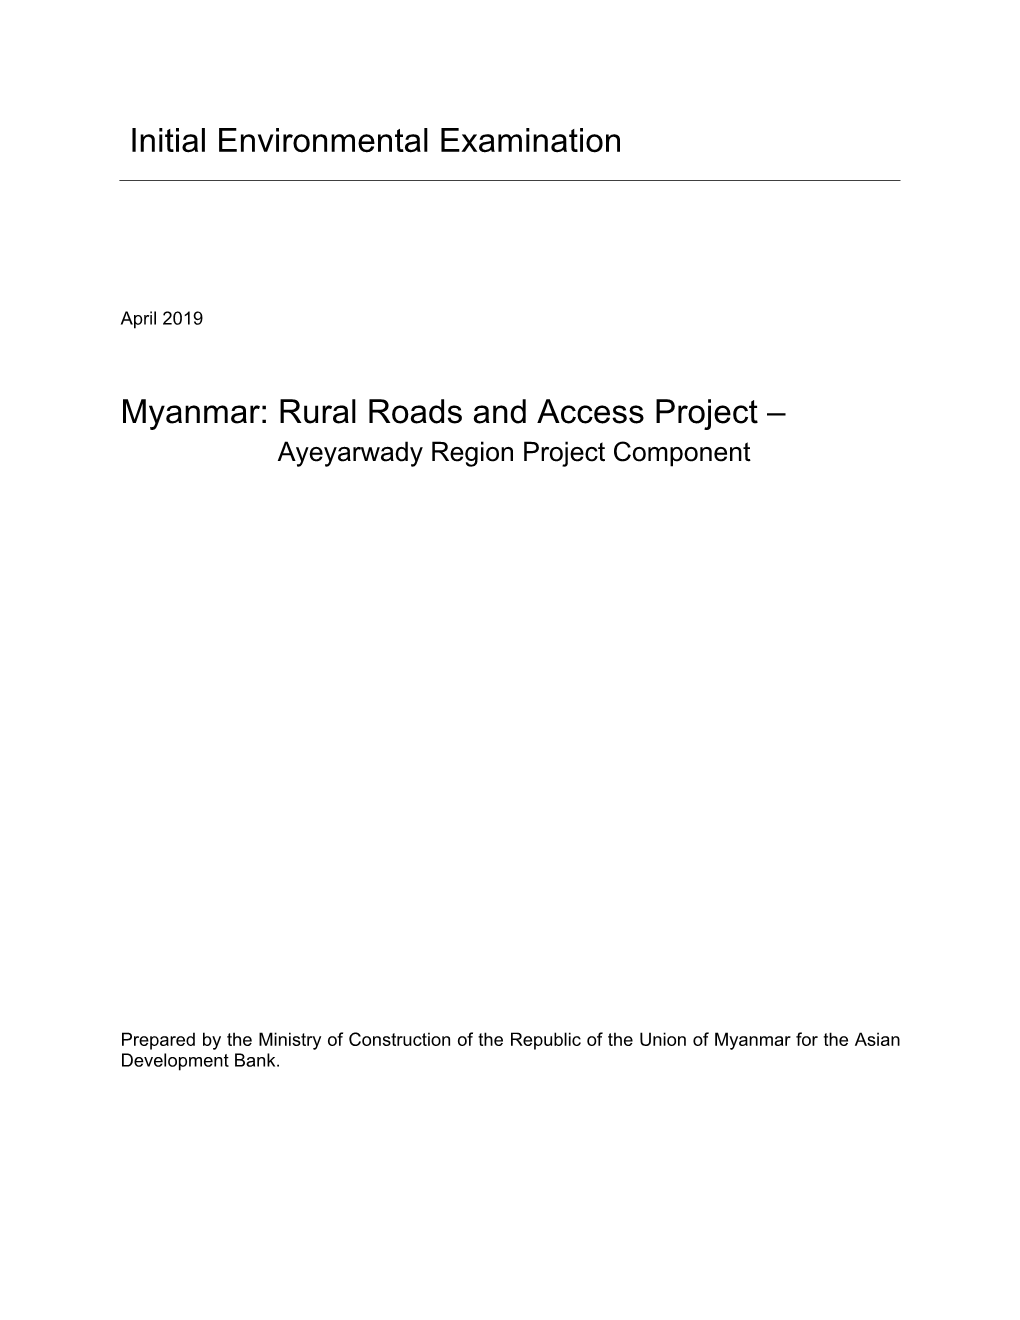 Rural Roads and Access Project – Ayeyarwady Region Project Component